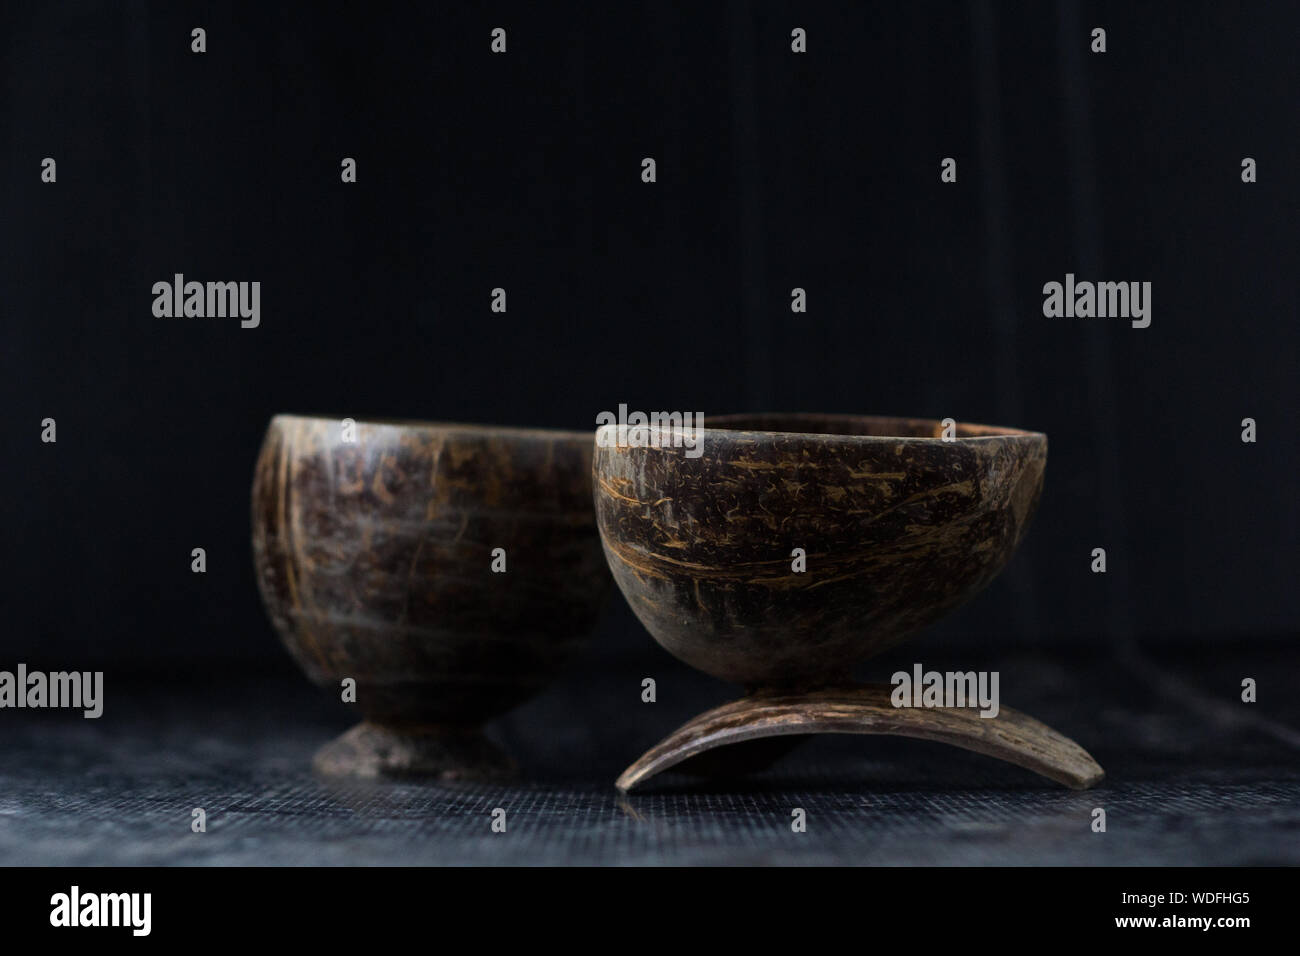 Close-up Of Wooden Bowls On Table Stock Photo